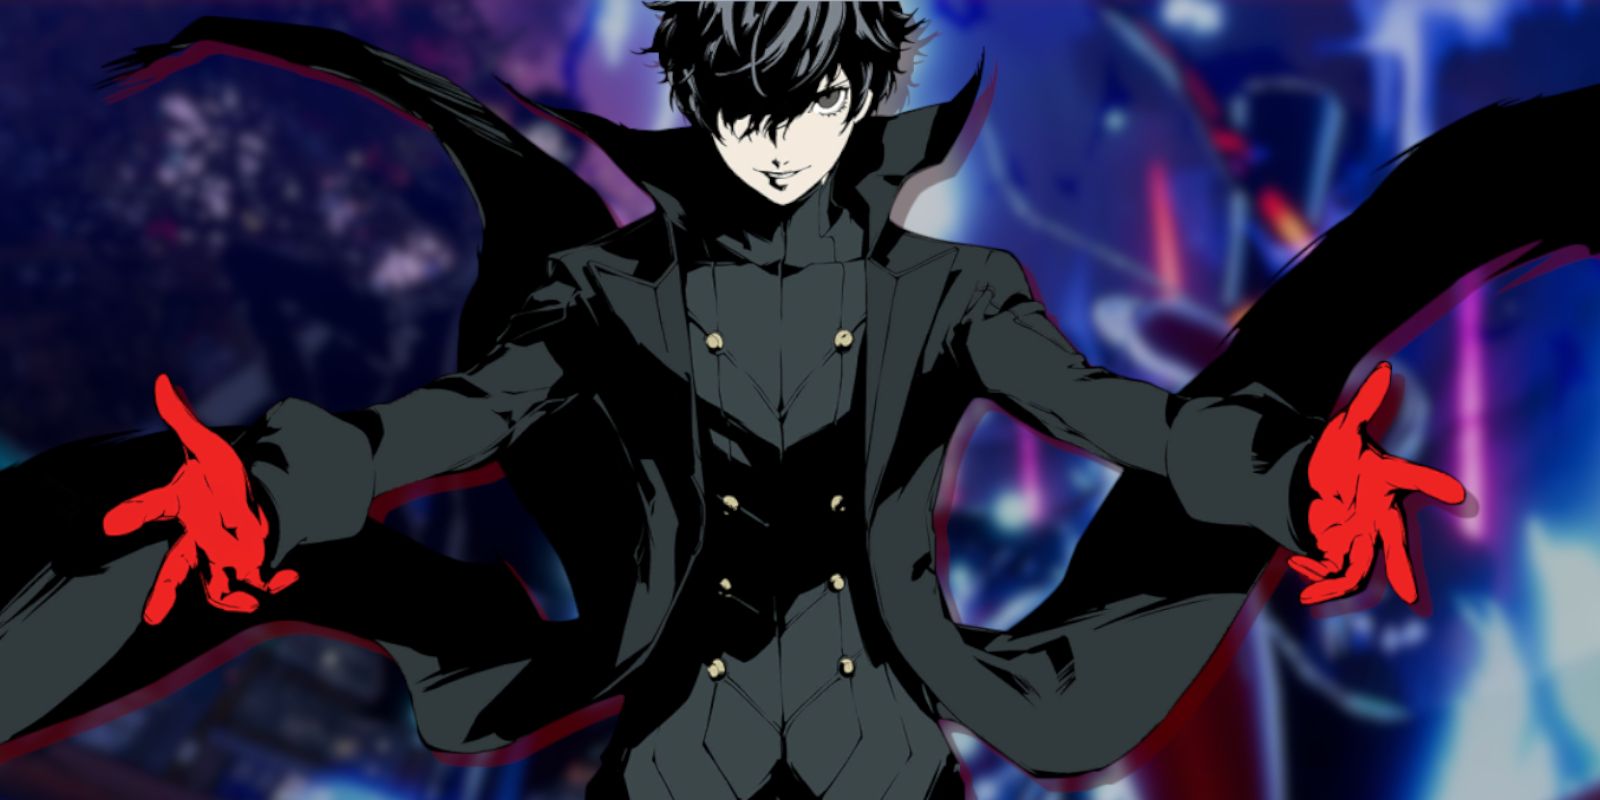 Joker extends his arms out in art from Persona 5